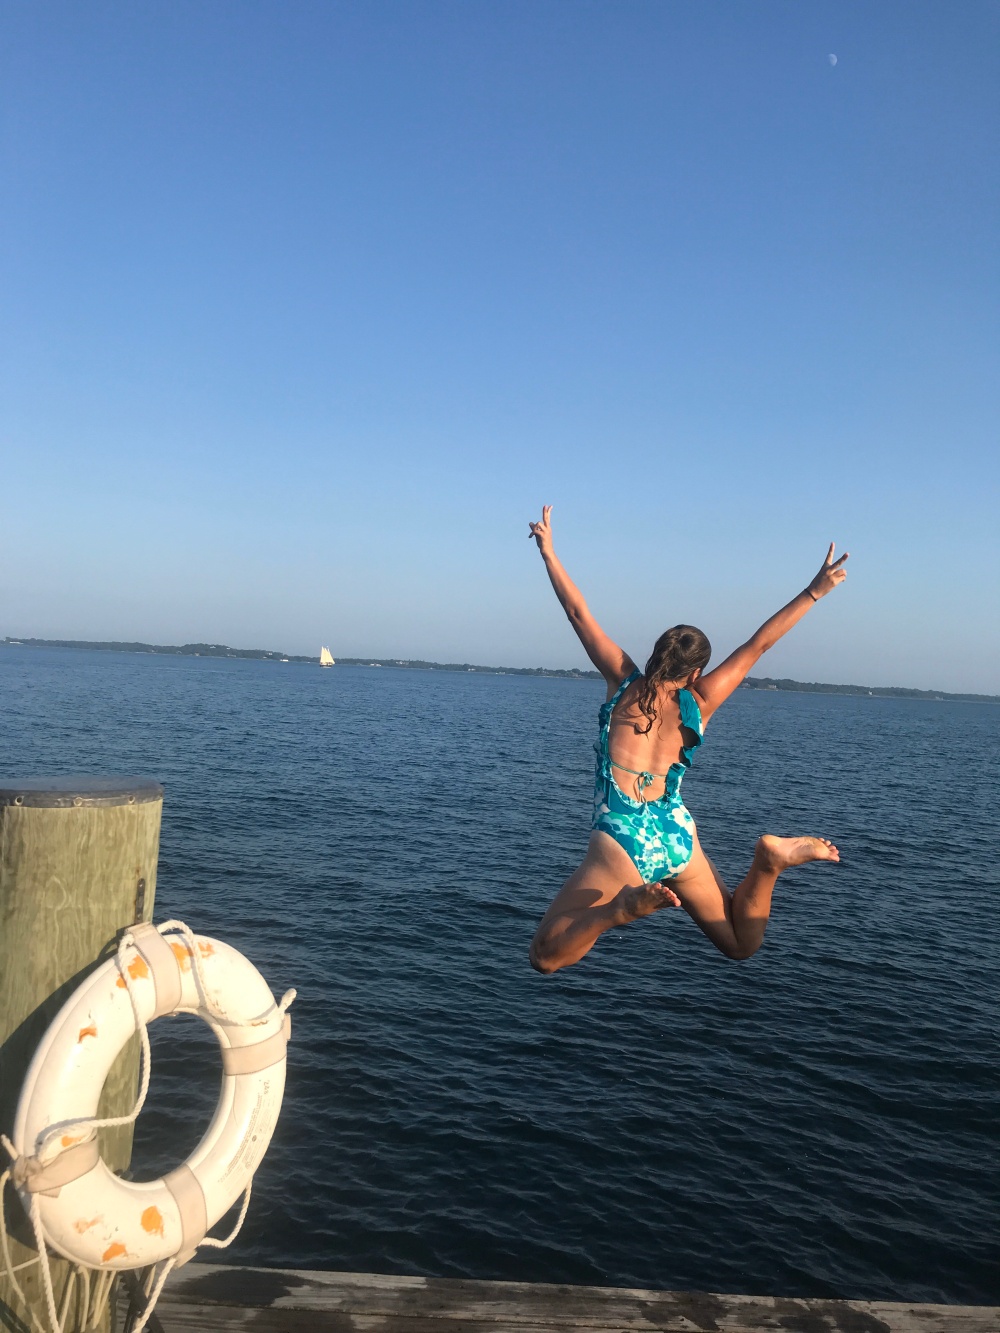 Jumping into 2L year like...